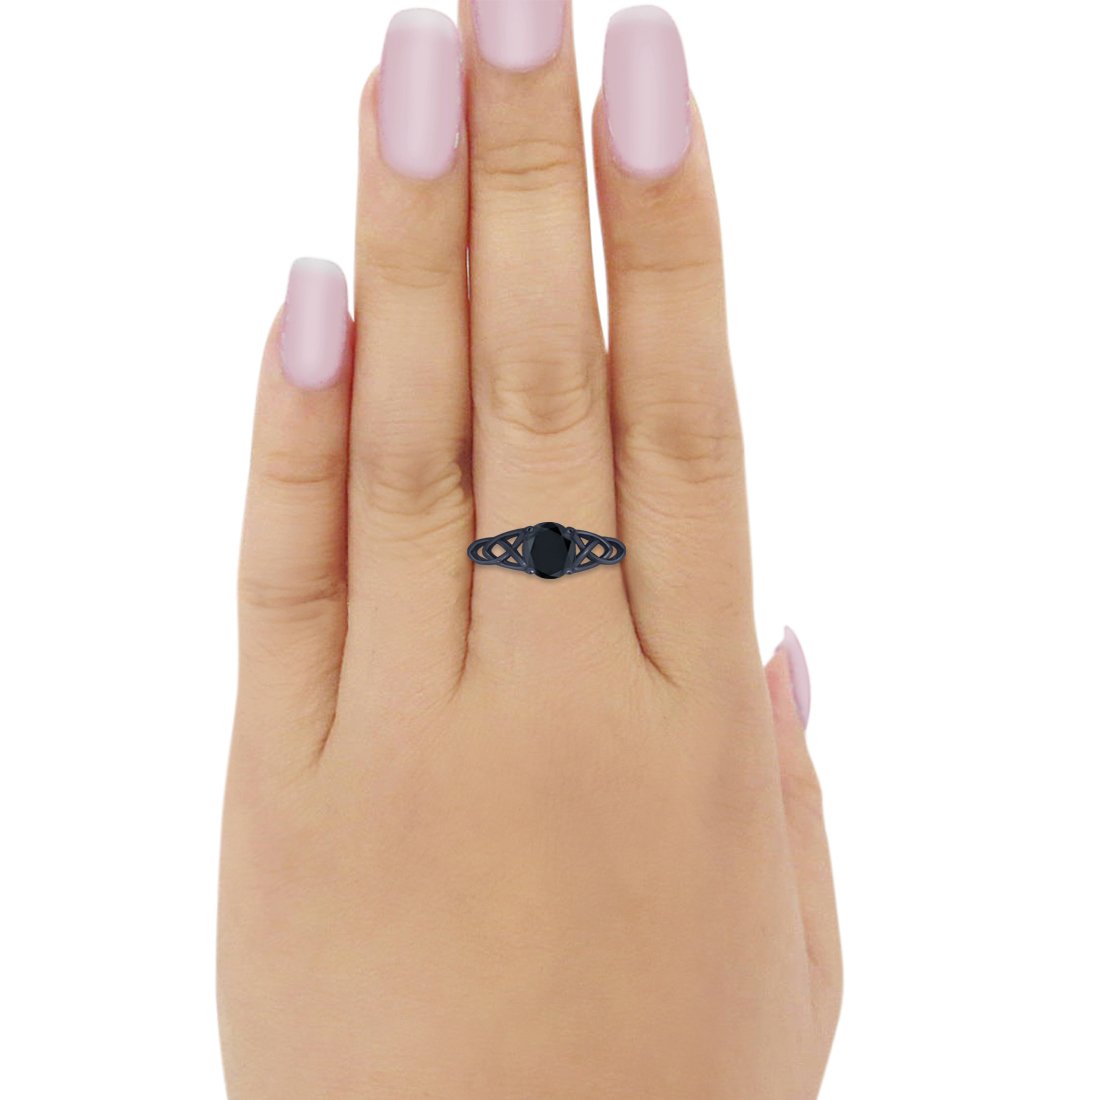 Halo Vintage Style Wedding Ring Black Tone, Simulated Black CZ 925 Sterling Silver